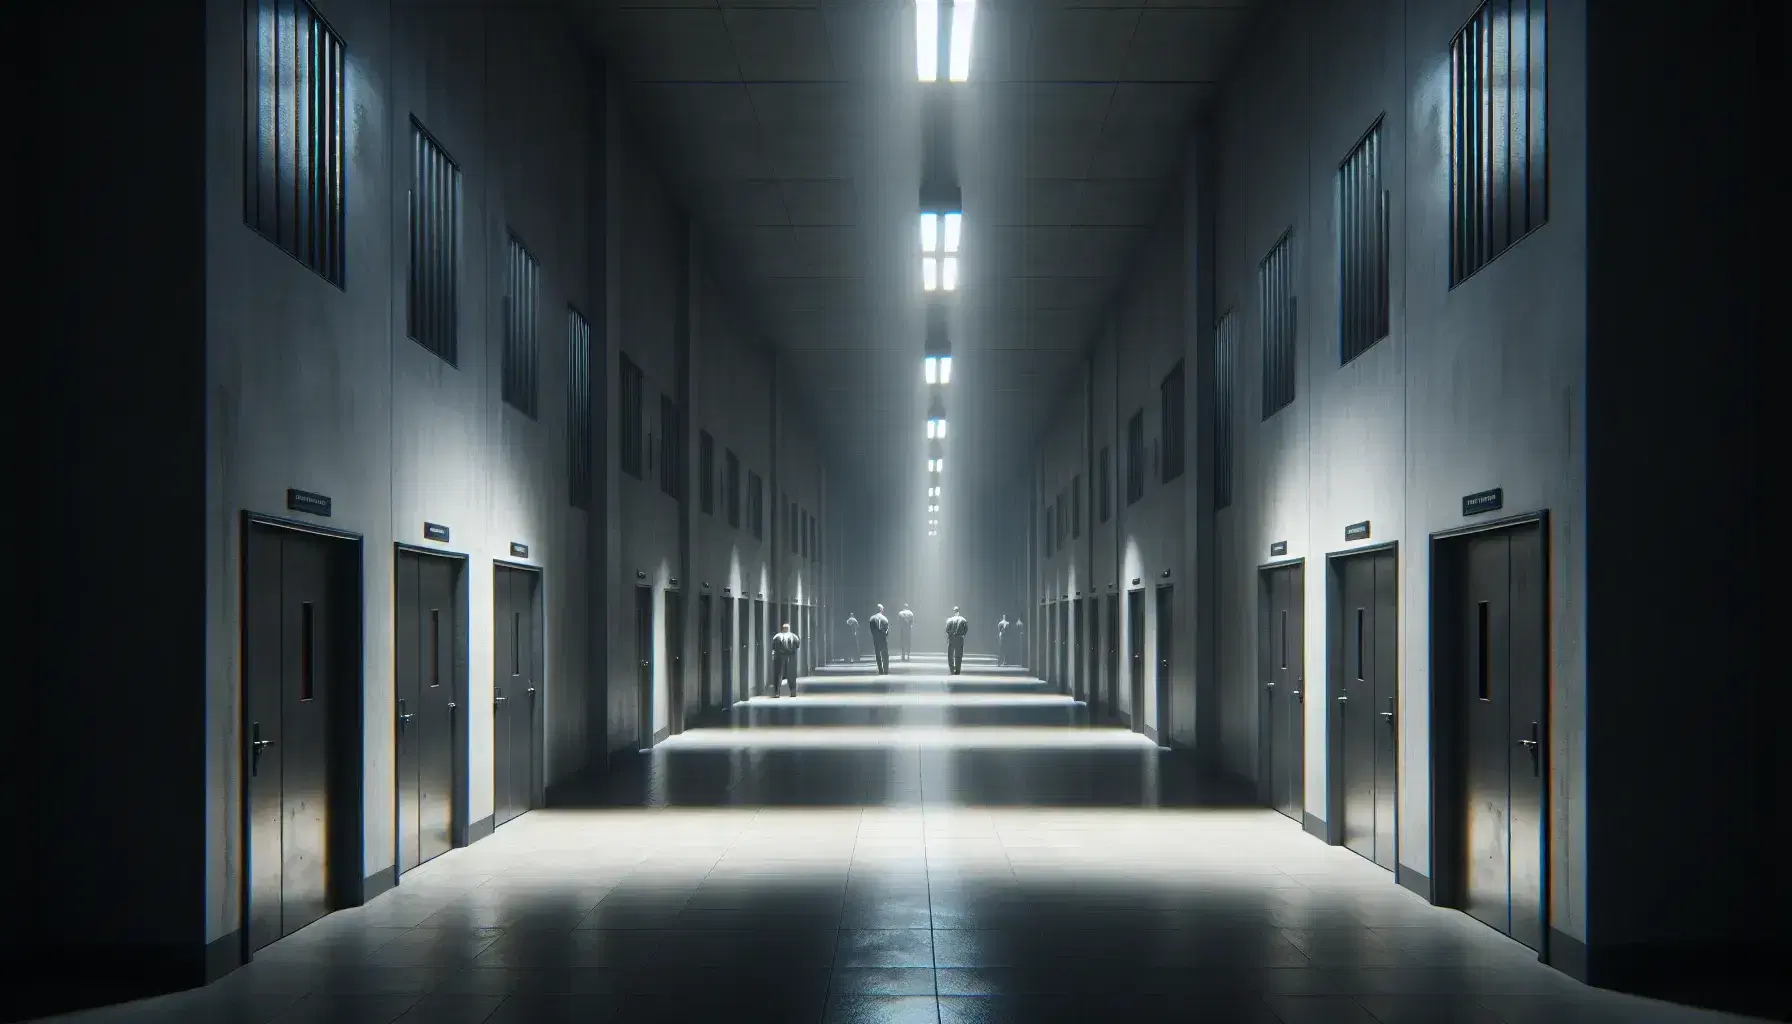 Fluorescently lit institutional corridor with closed metal doors, two uniformed figures face each other at the end.